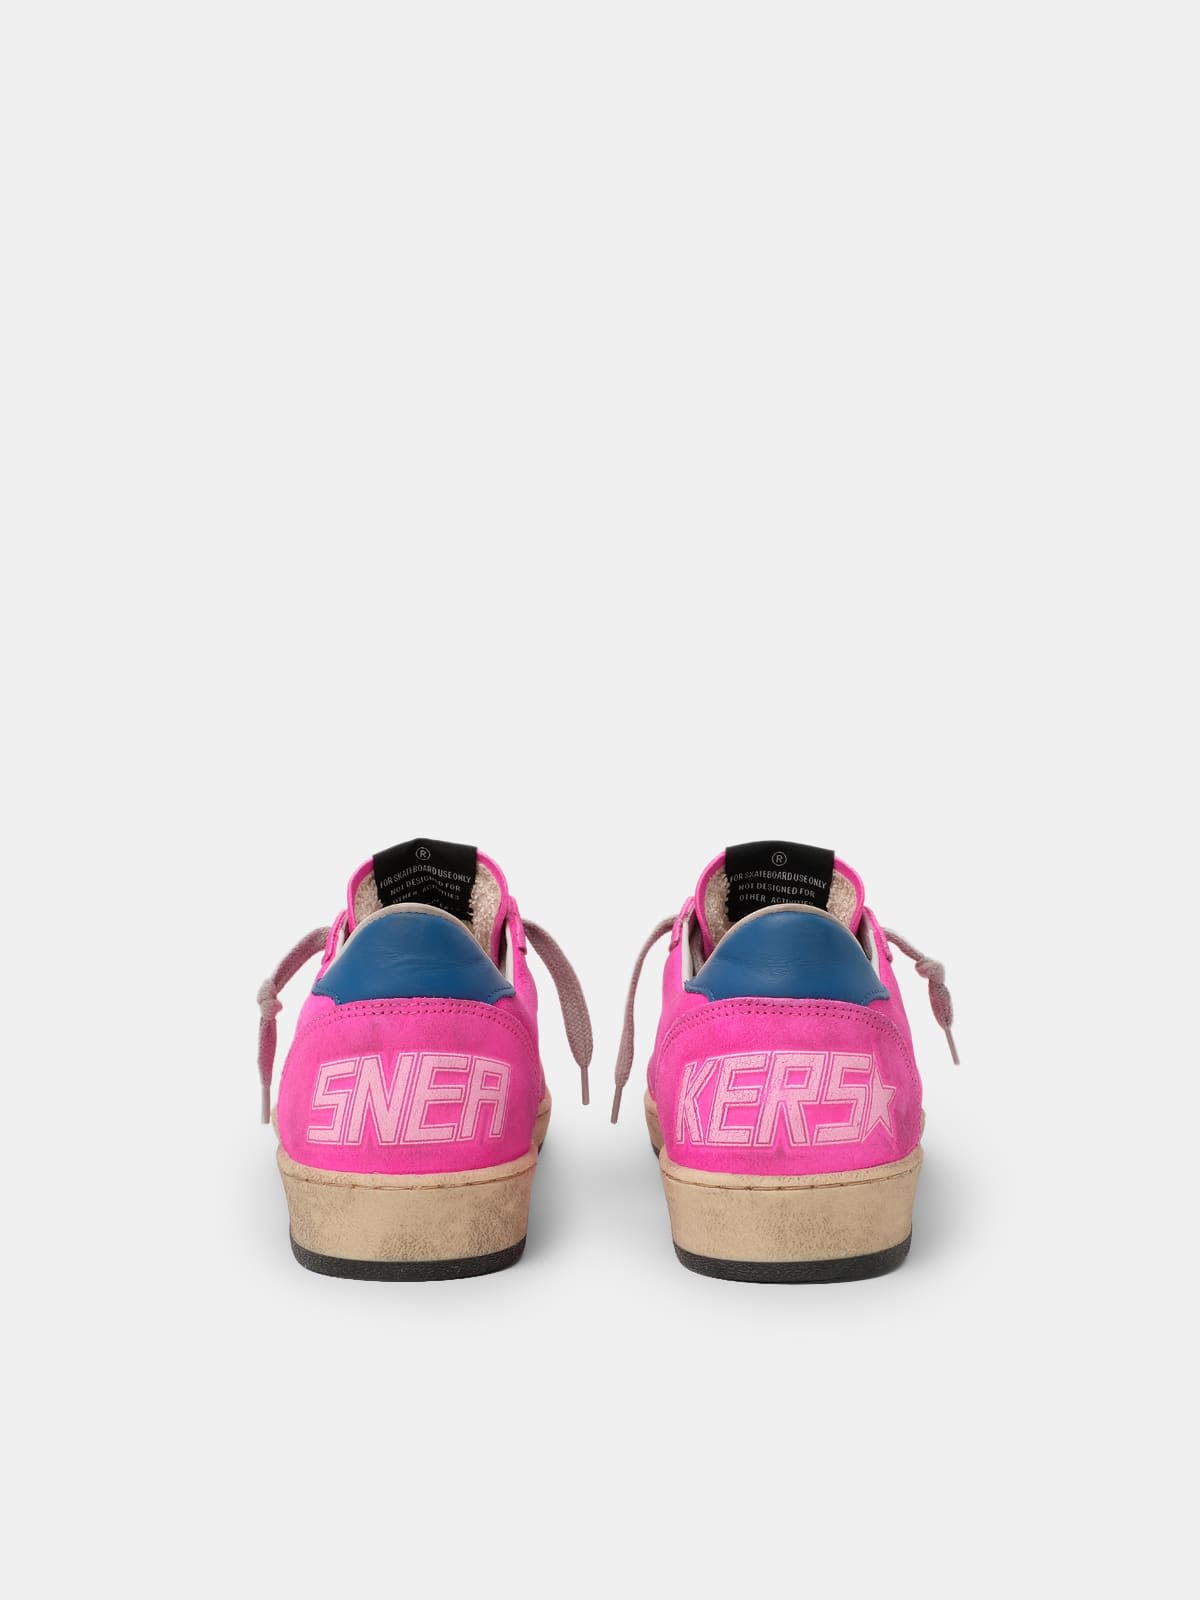 Ball Star sneakers in fuchsia leather with splashes of colour